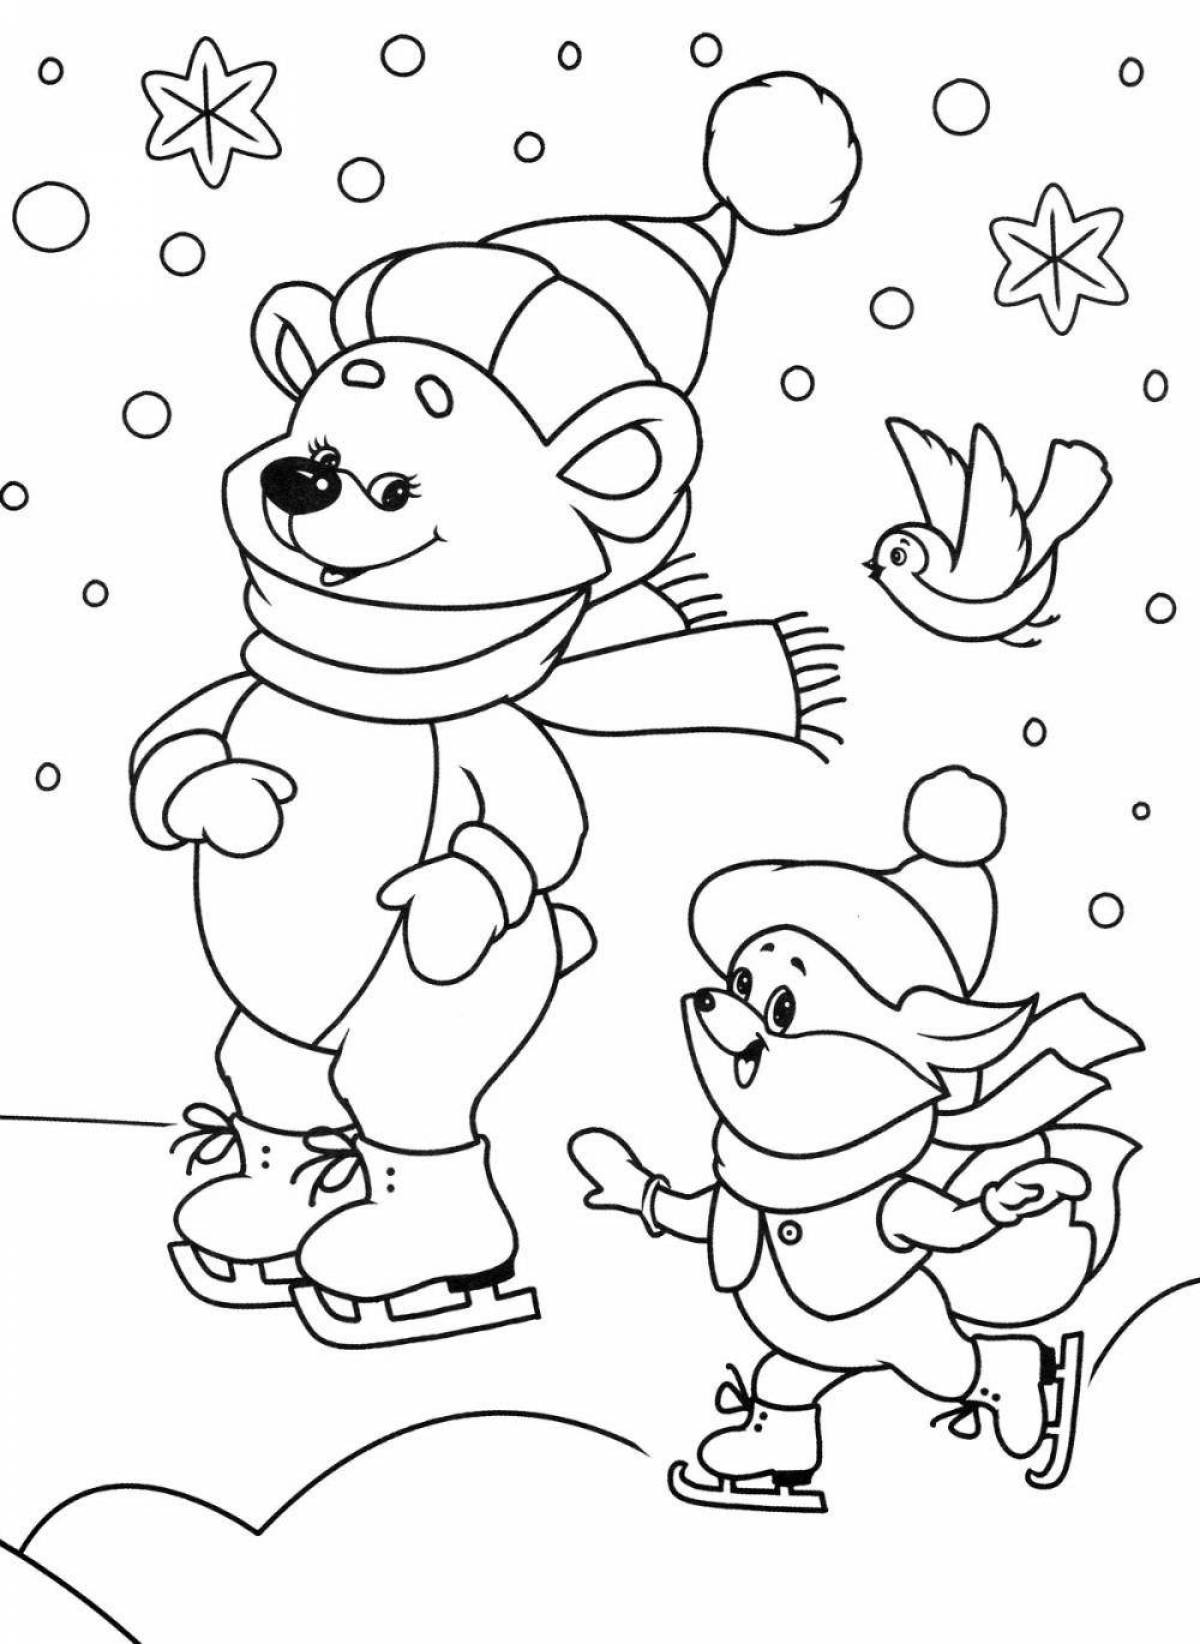 Delightful winter coloring book for children 5 years old